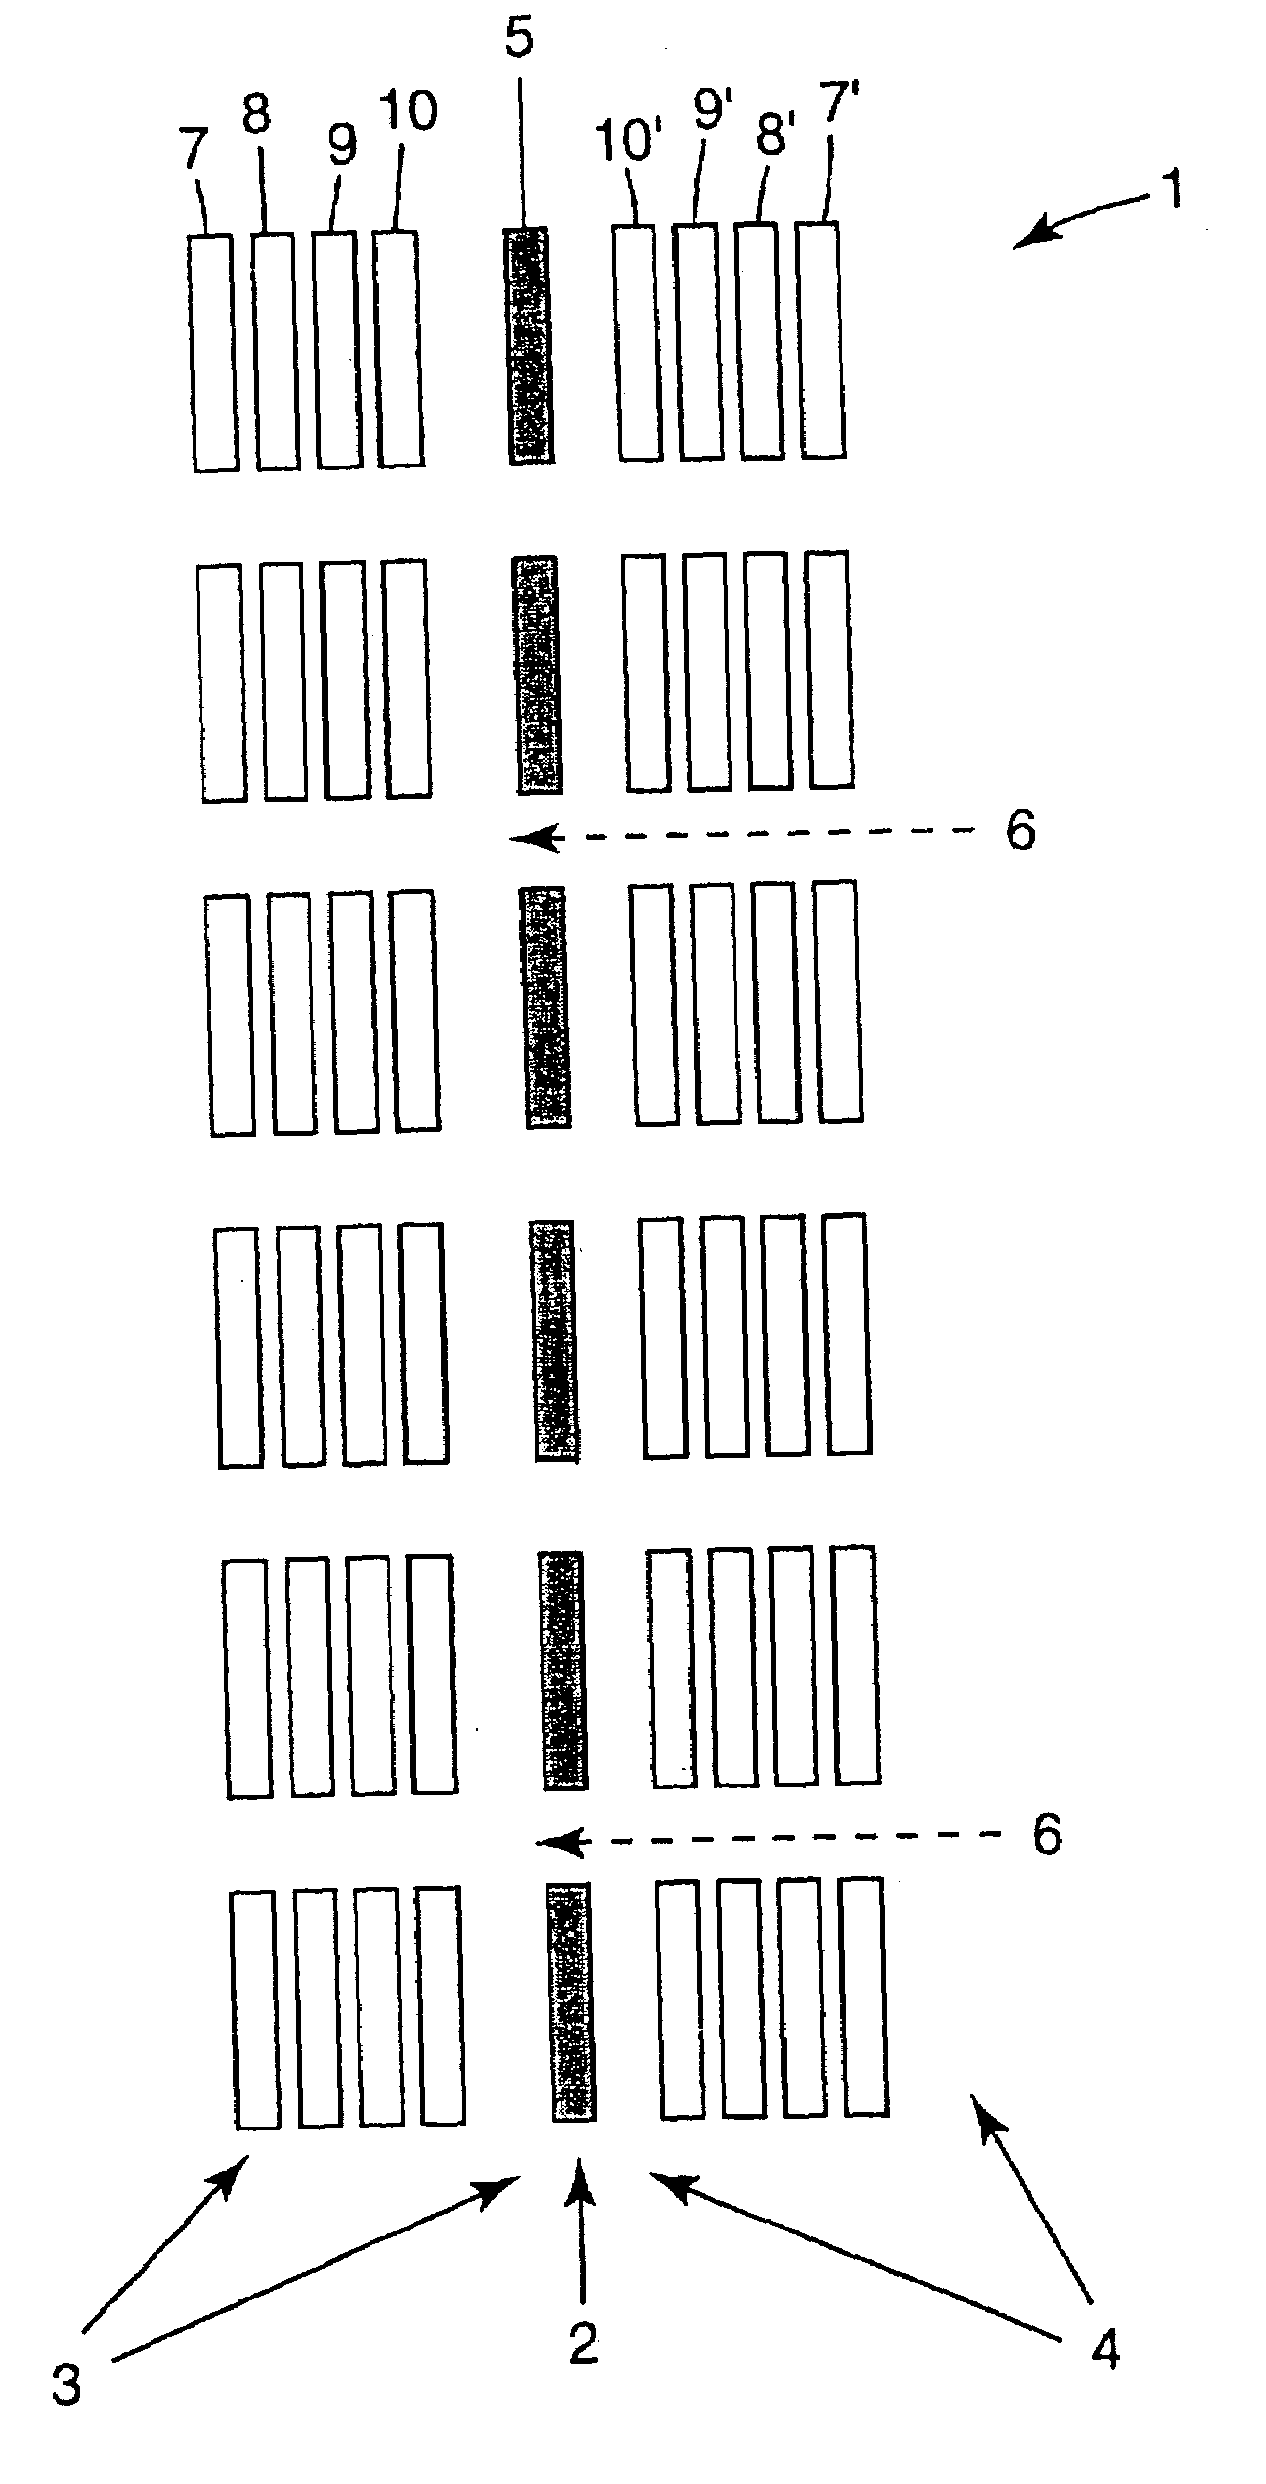 Display unit and methods of displaying an image